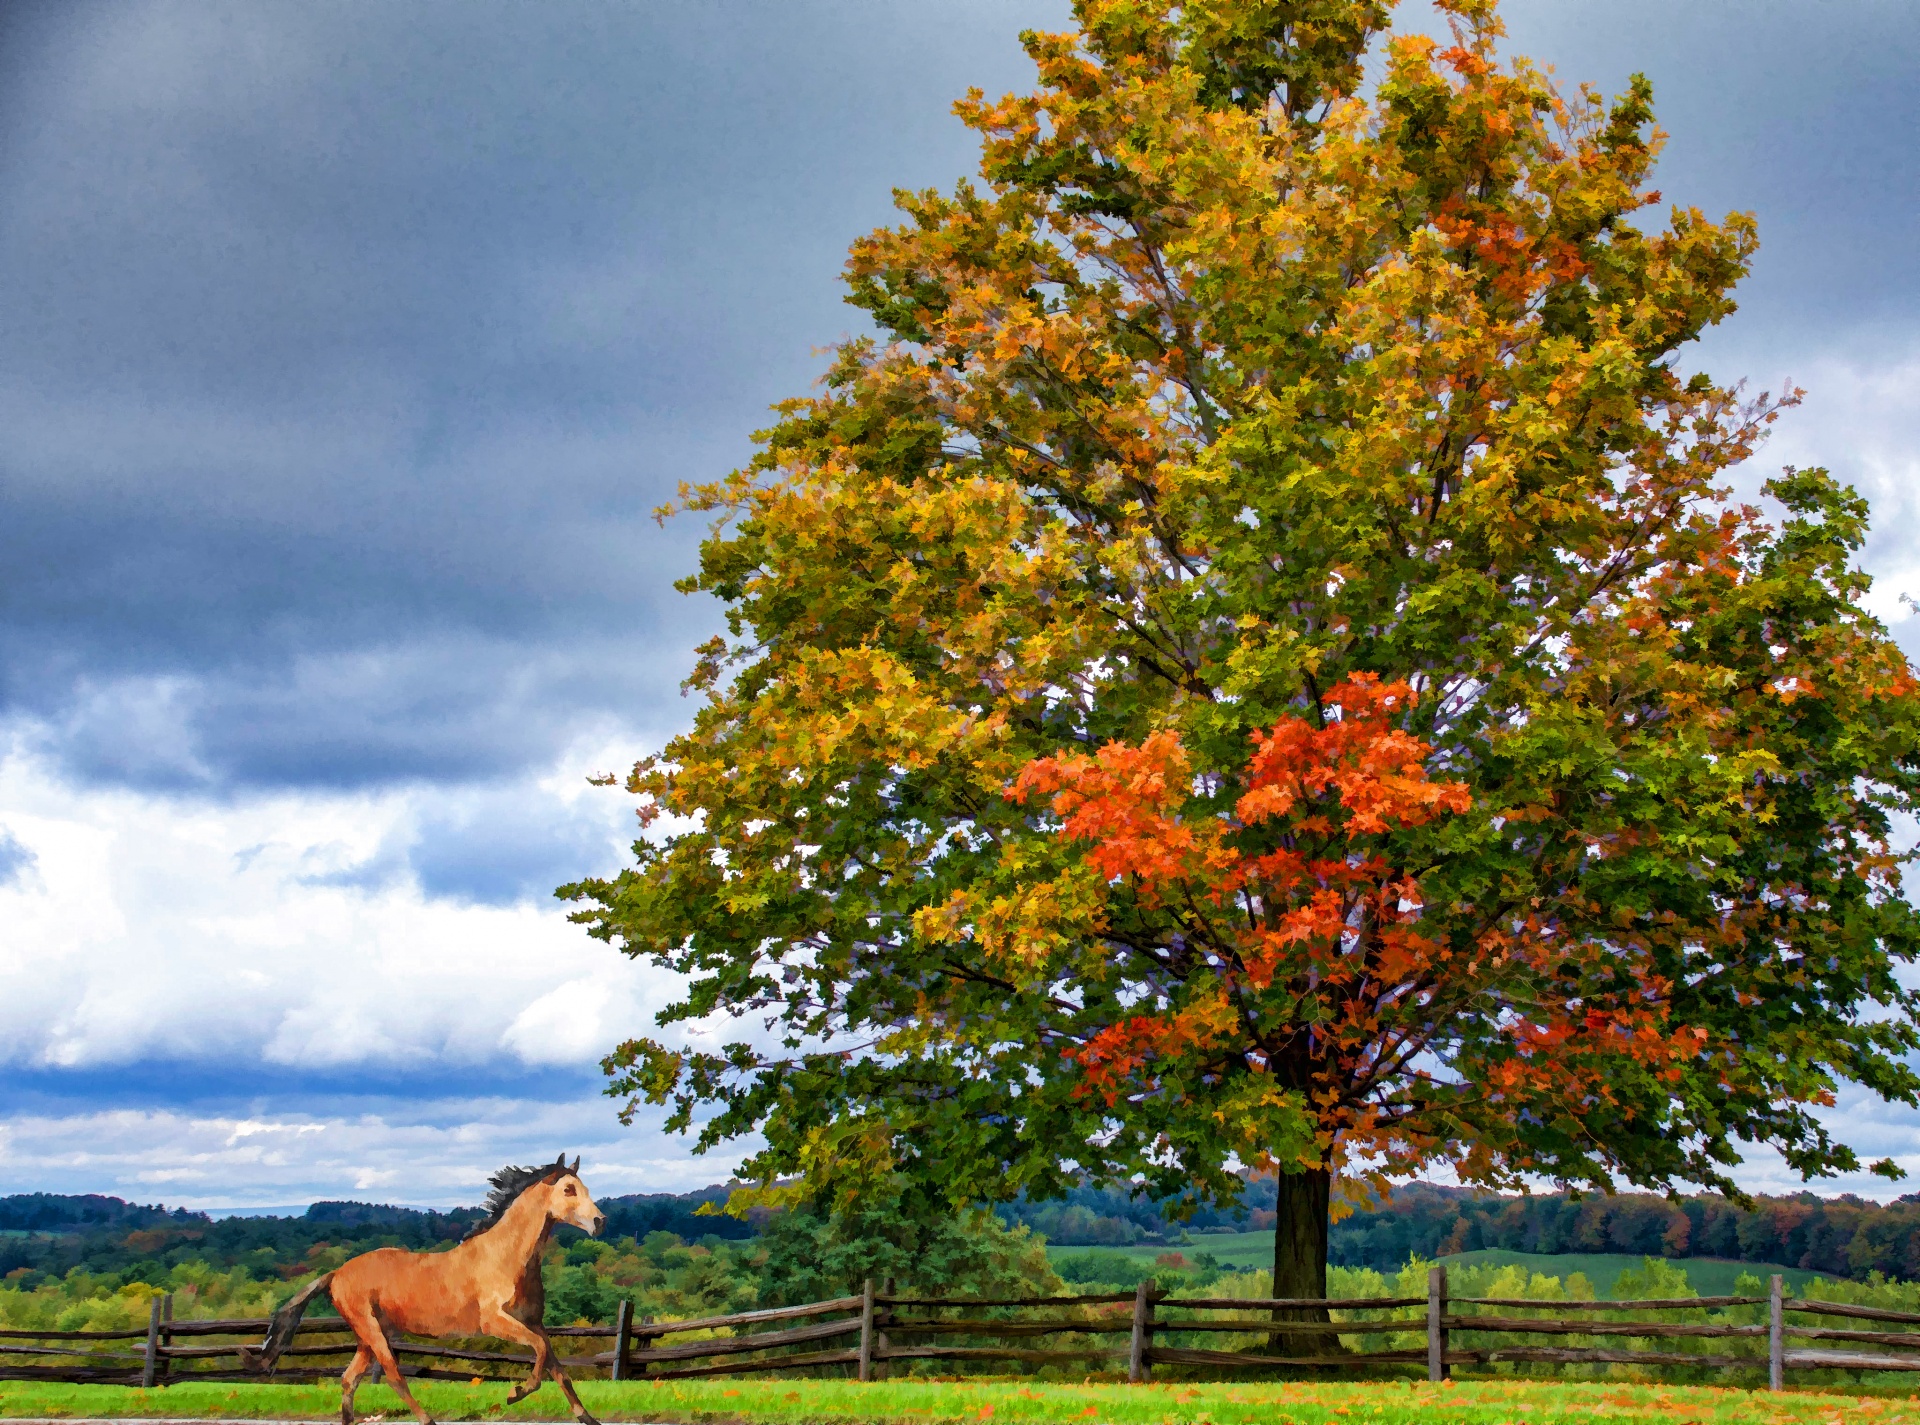 horse in front of a huge tree changing colors in the countryside